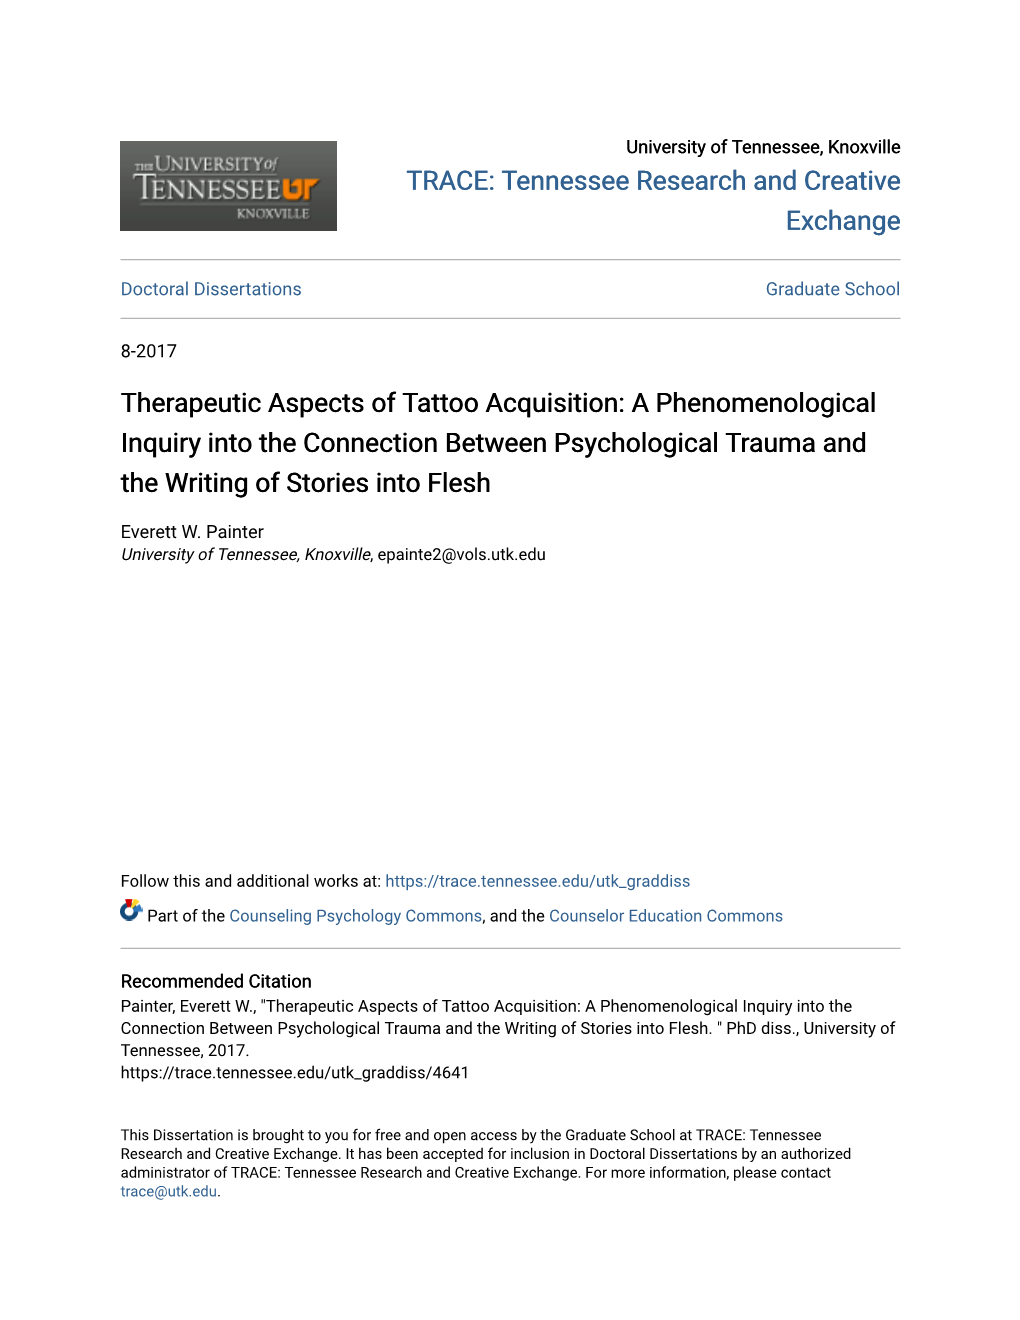 Therapeutic Aspects of Tattoo Acquisition: a Phenomenological Inquiry Into the Connection Between Psychological Trauma and the Writing of Stories Into Flesh